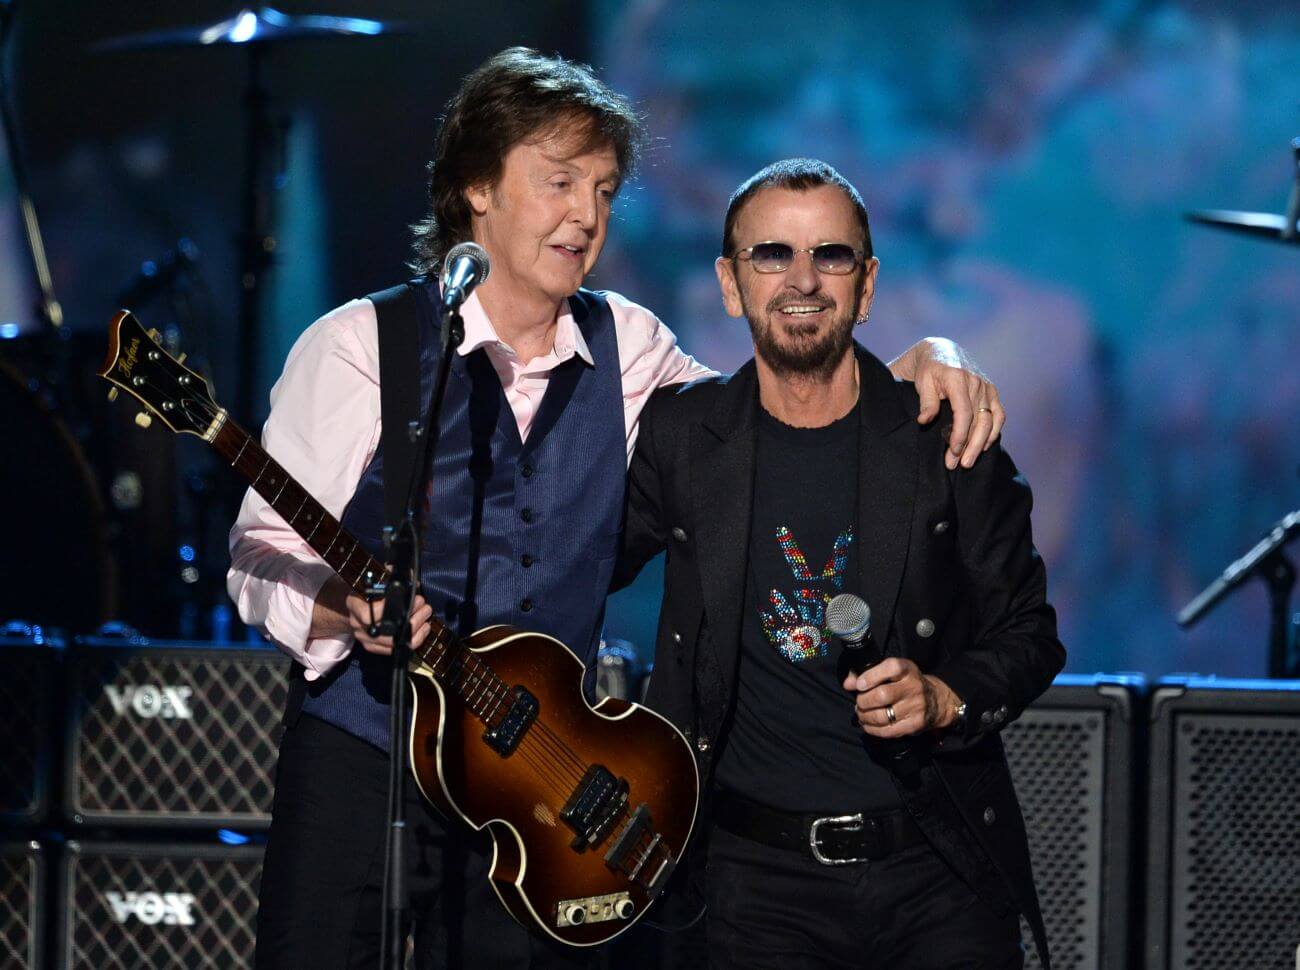 Paul McCartney holds a guitar and drapes his arm around Ringo Starr's shoulders. They stand on a stage.